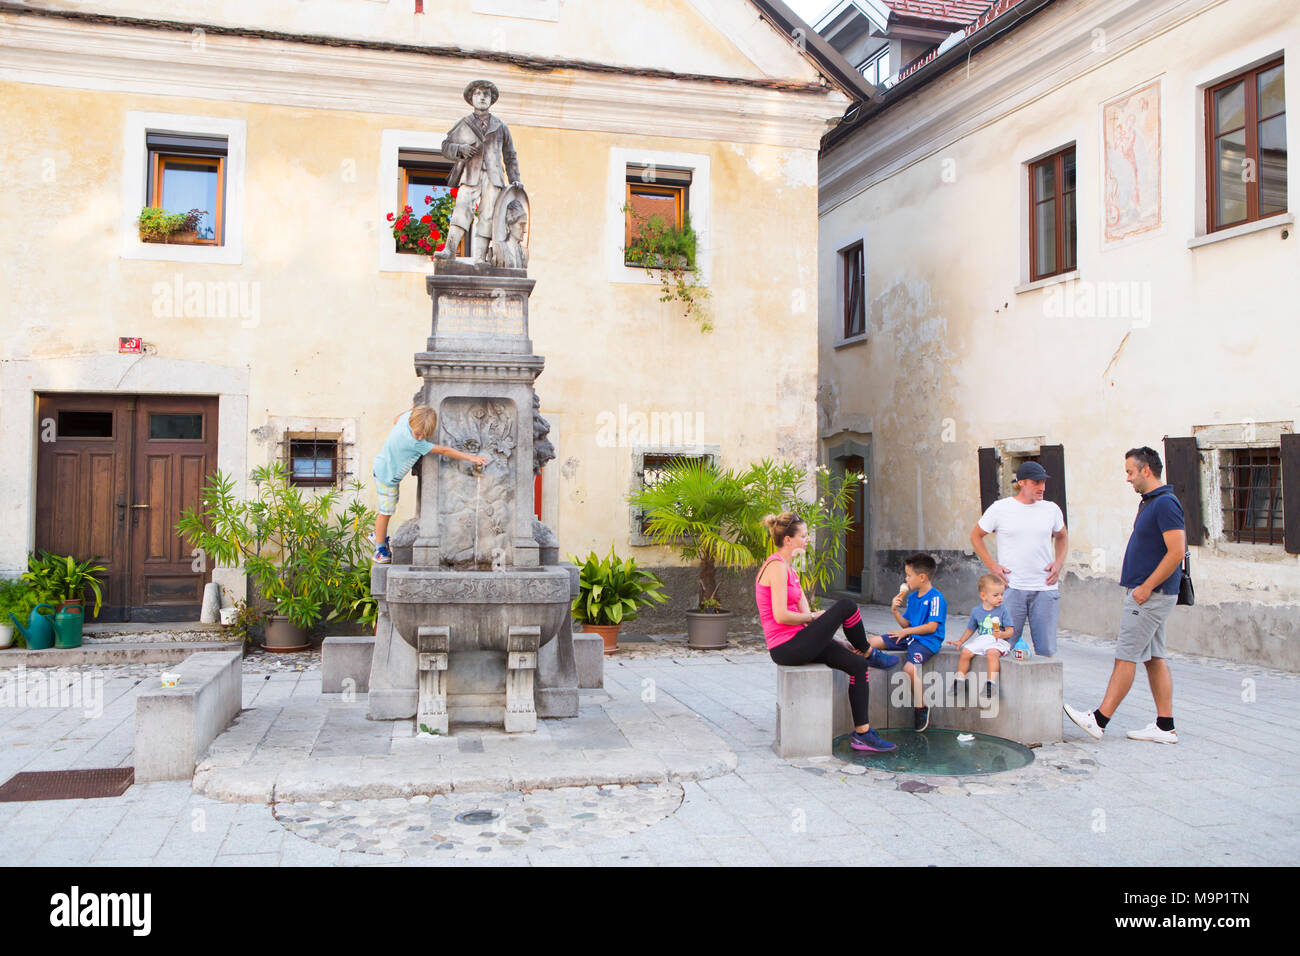 Locals hanging out on Linhartov Trg, the colorful main square of Radovljica, Slovenia Stock Photo